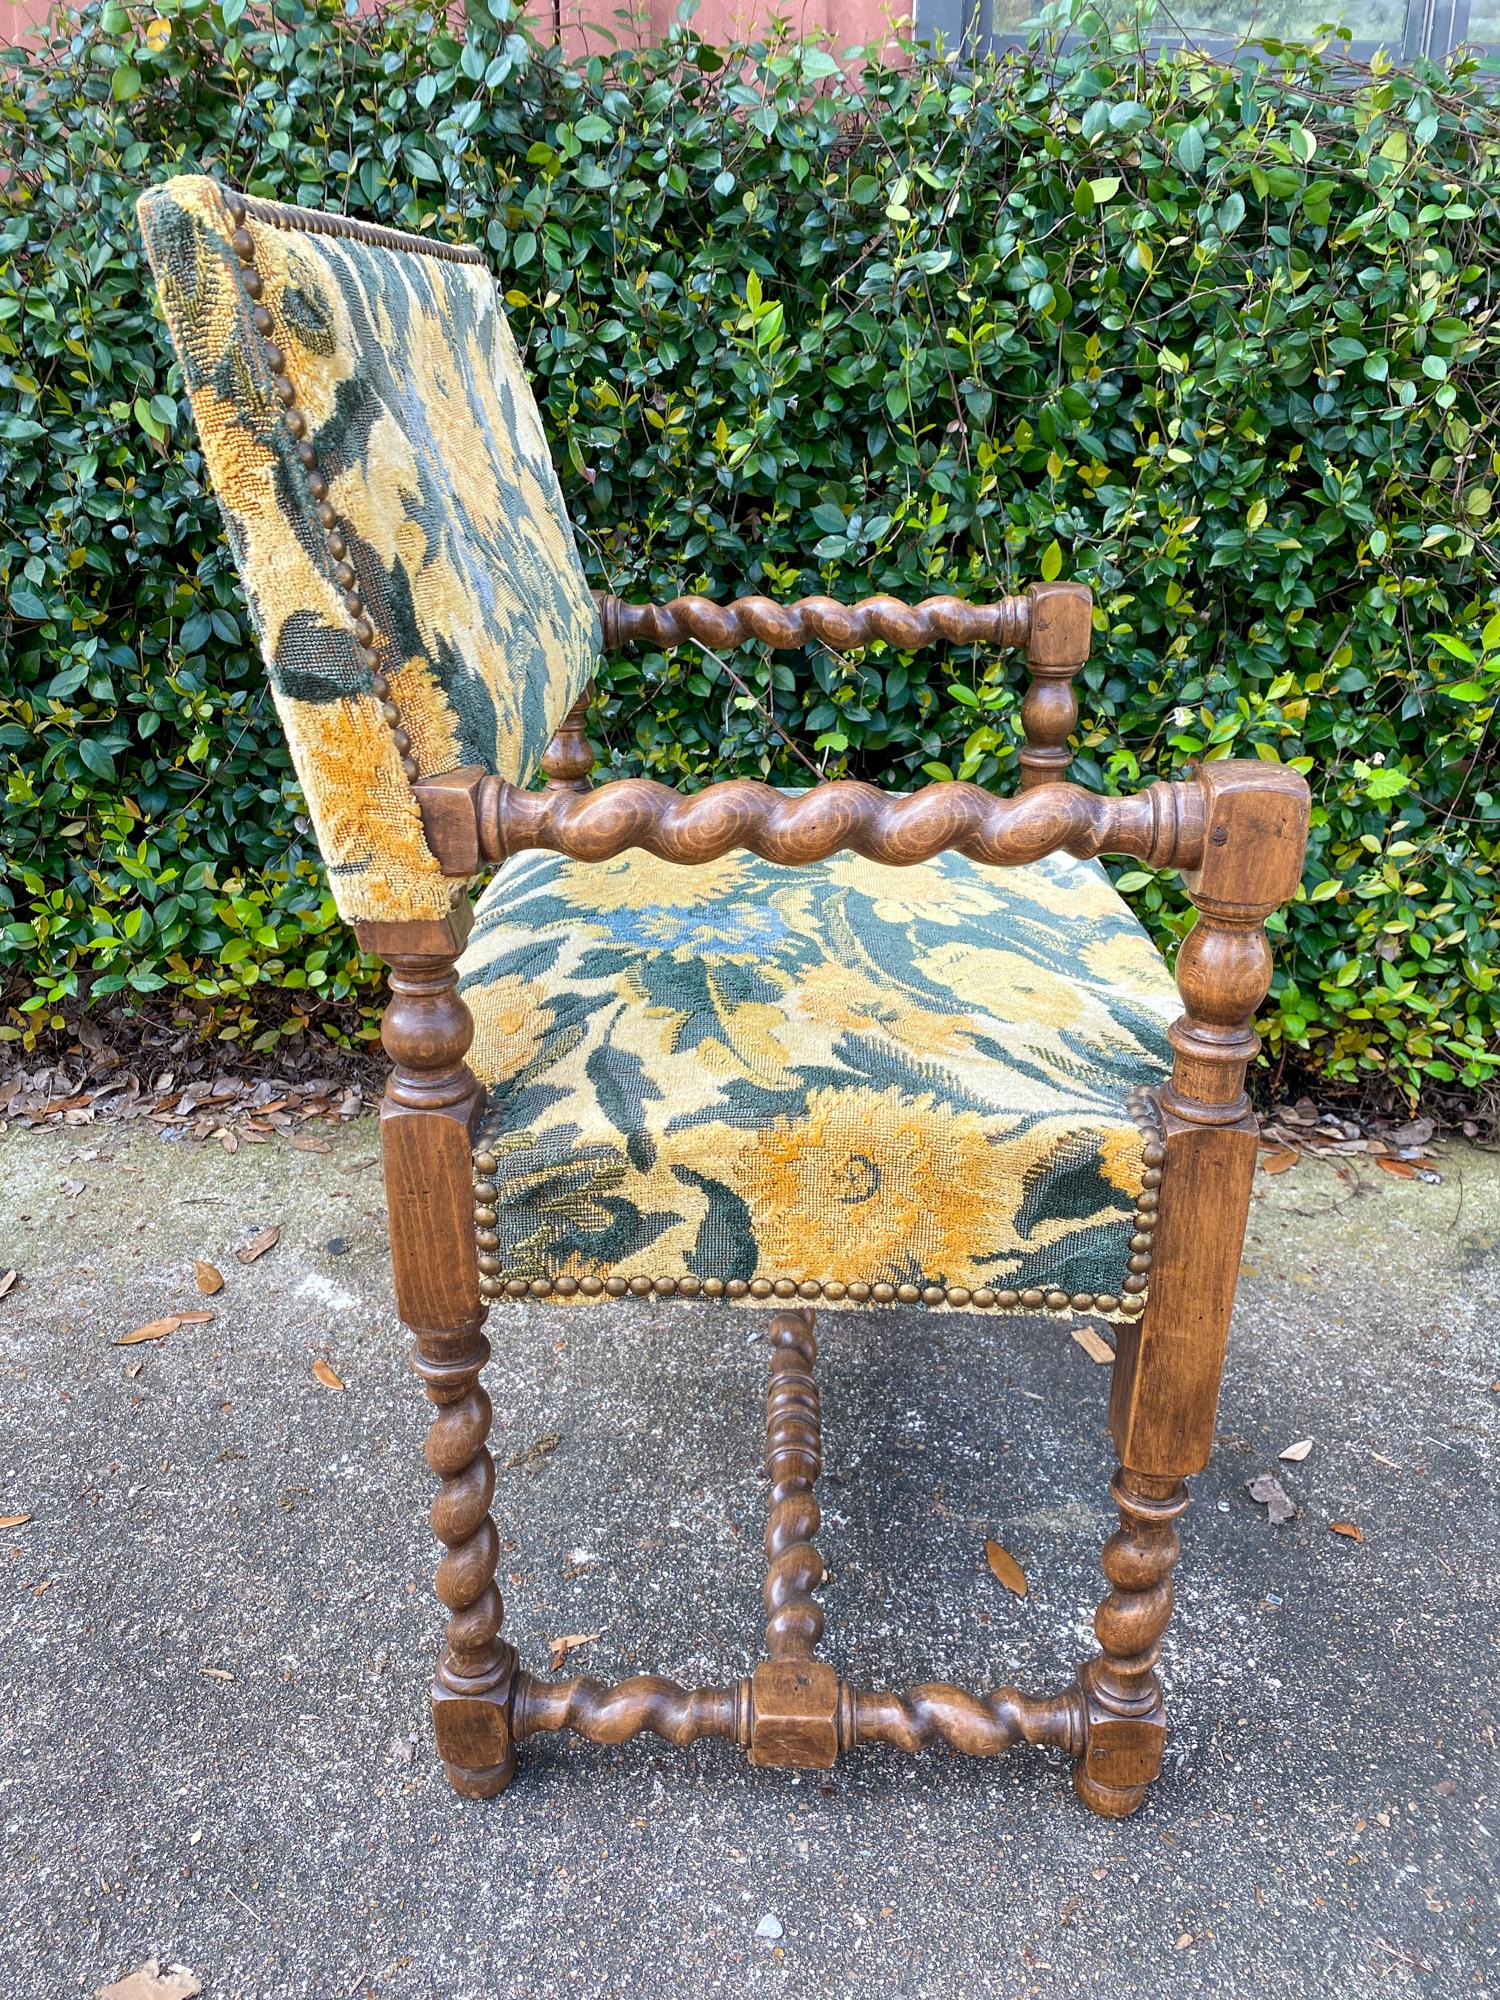 Antique French Barley Twist Armchair with Floral Upholstery, circa 1900 6